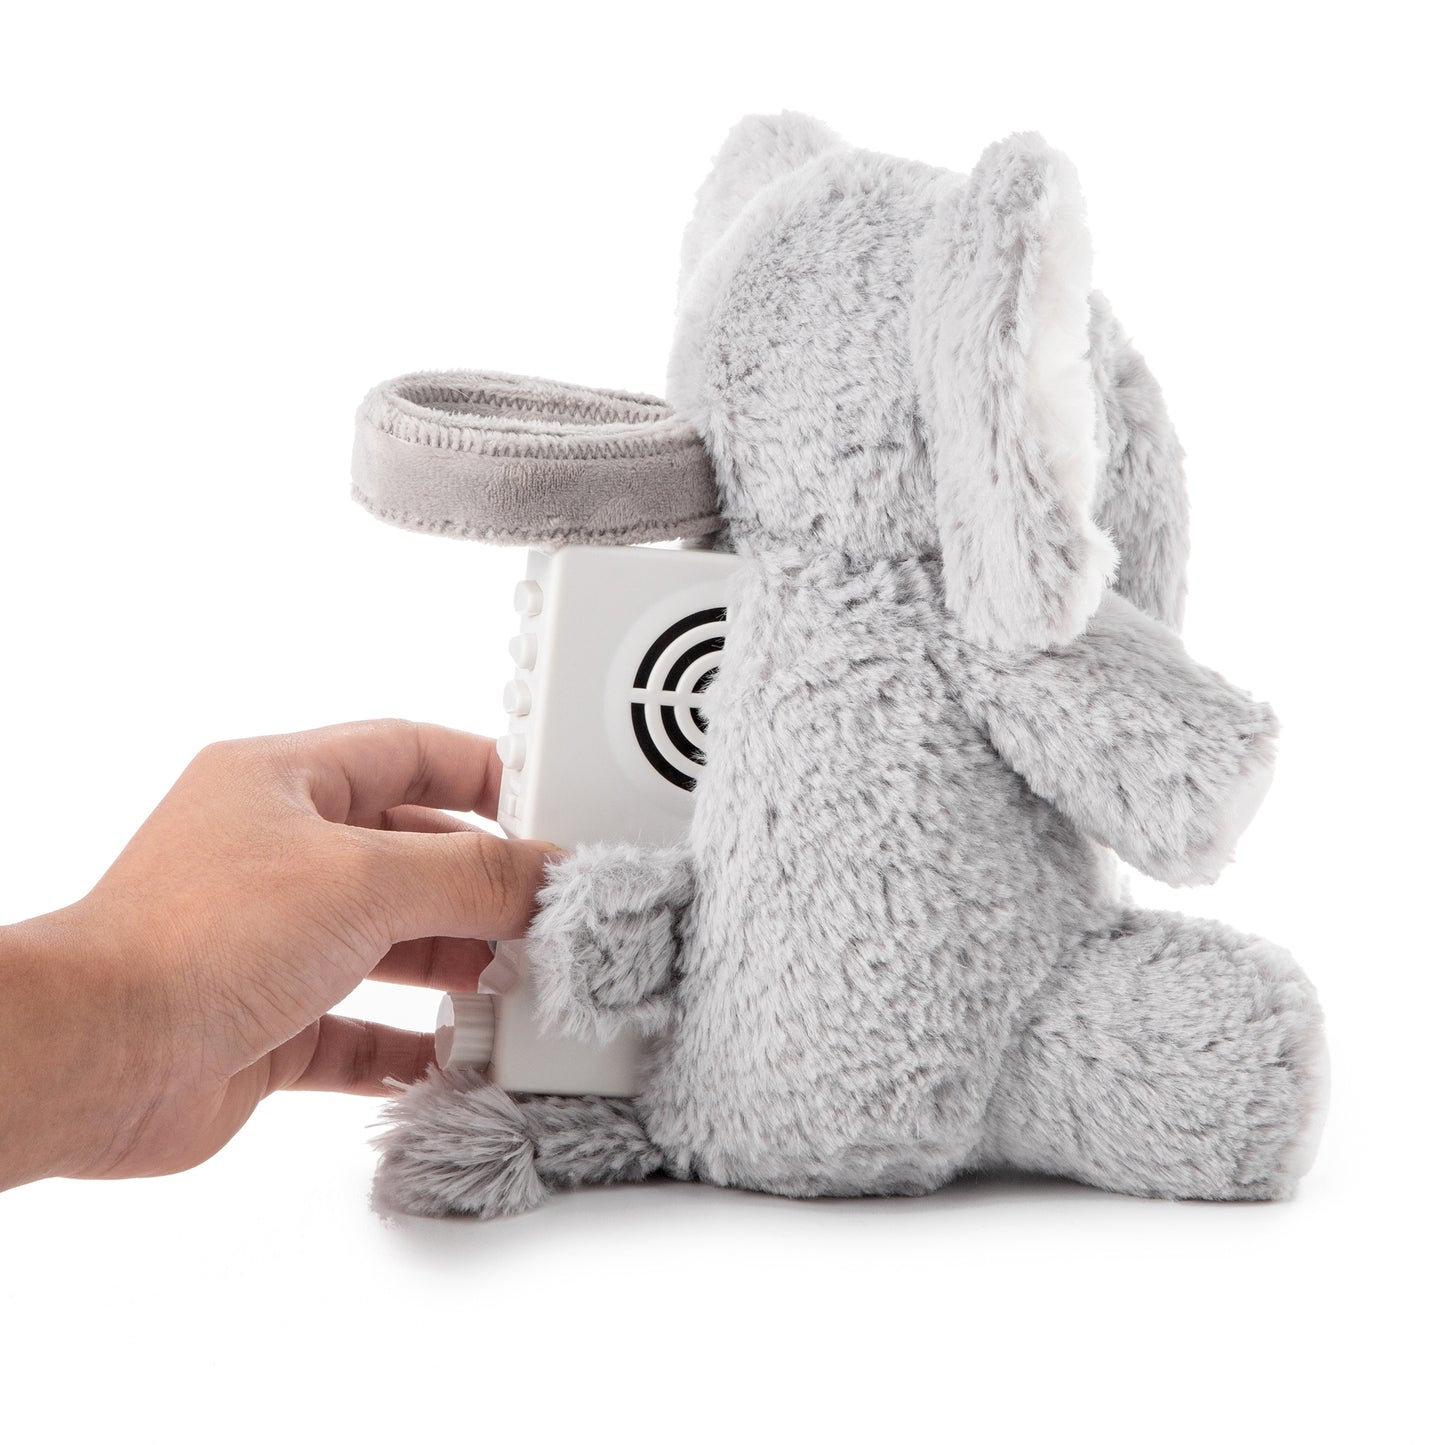 Elliot Elephant On The Go - Soothing Sound Machine-Cloud B-Do-Gree Generations